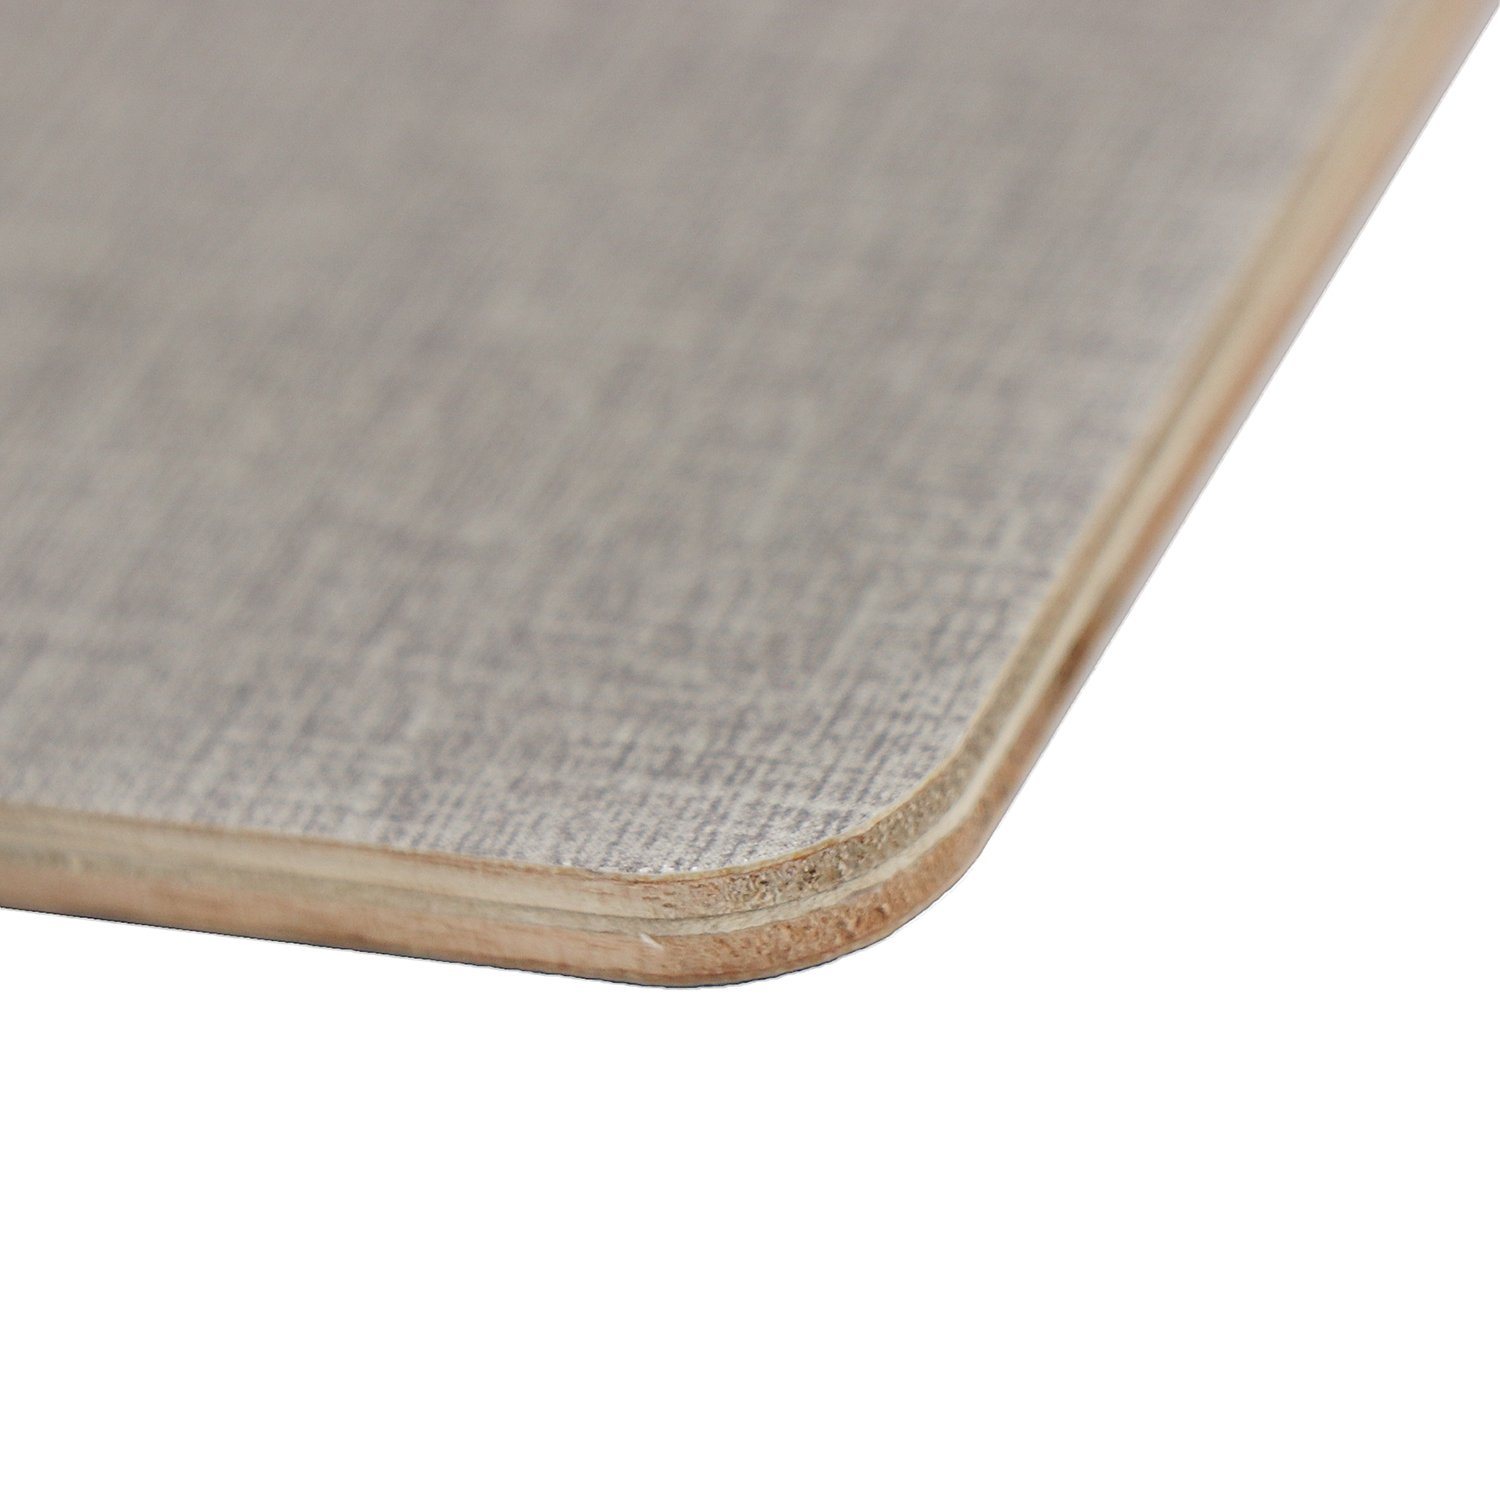 China Good Quality Melamine Film Faced Ply Wood Board Multi Wood Grain Plywood for Furniture